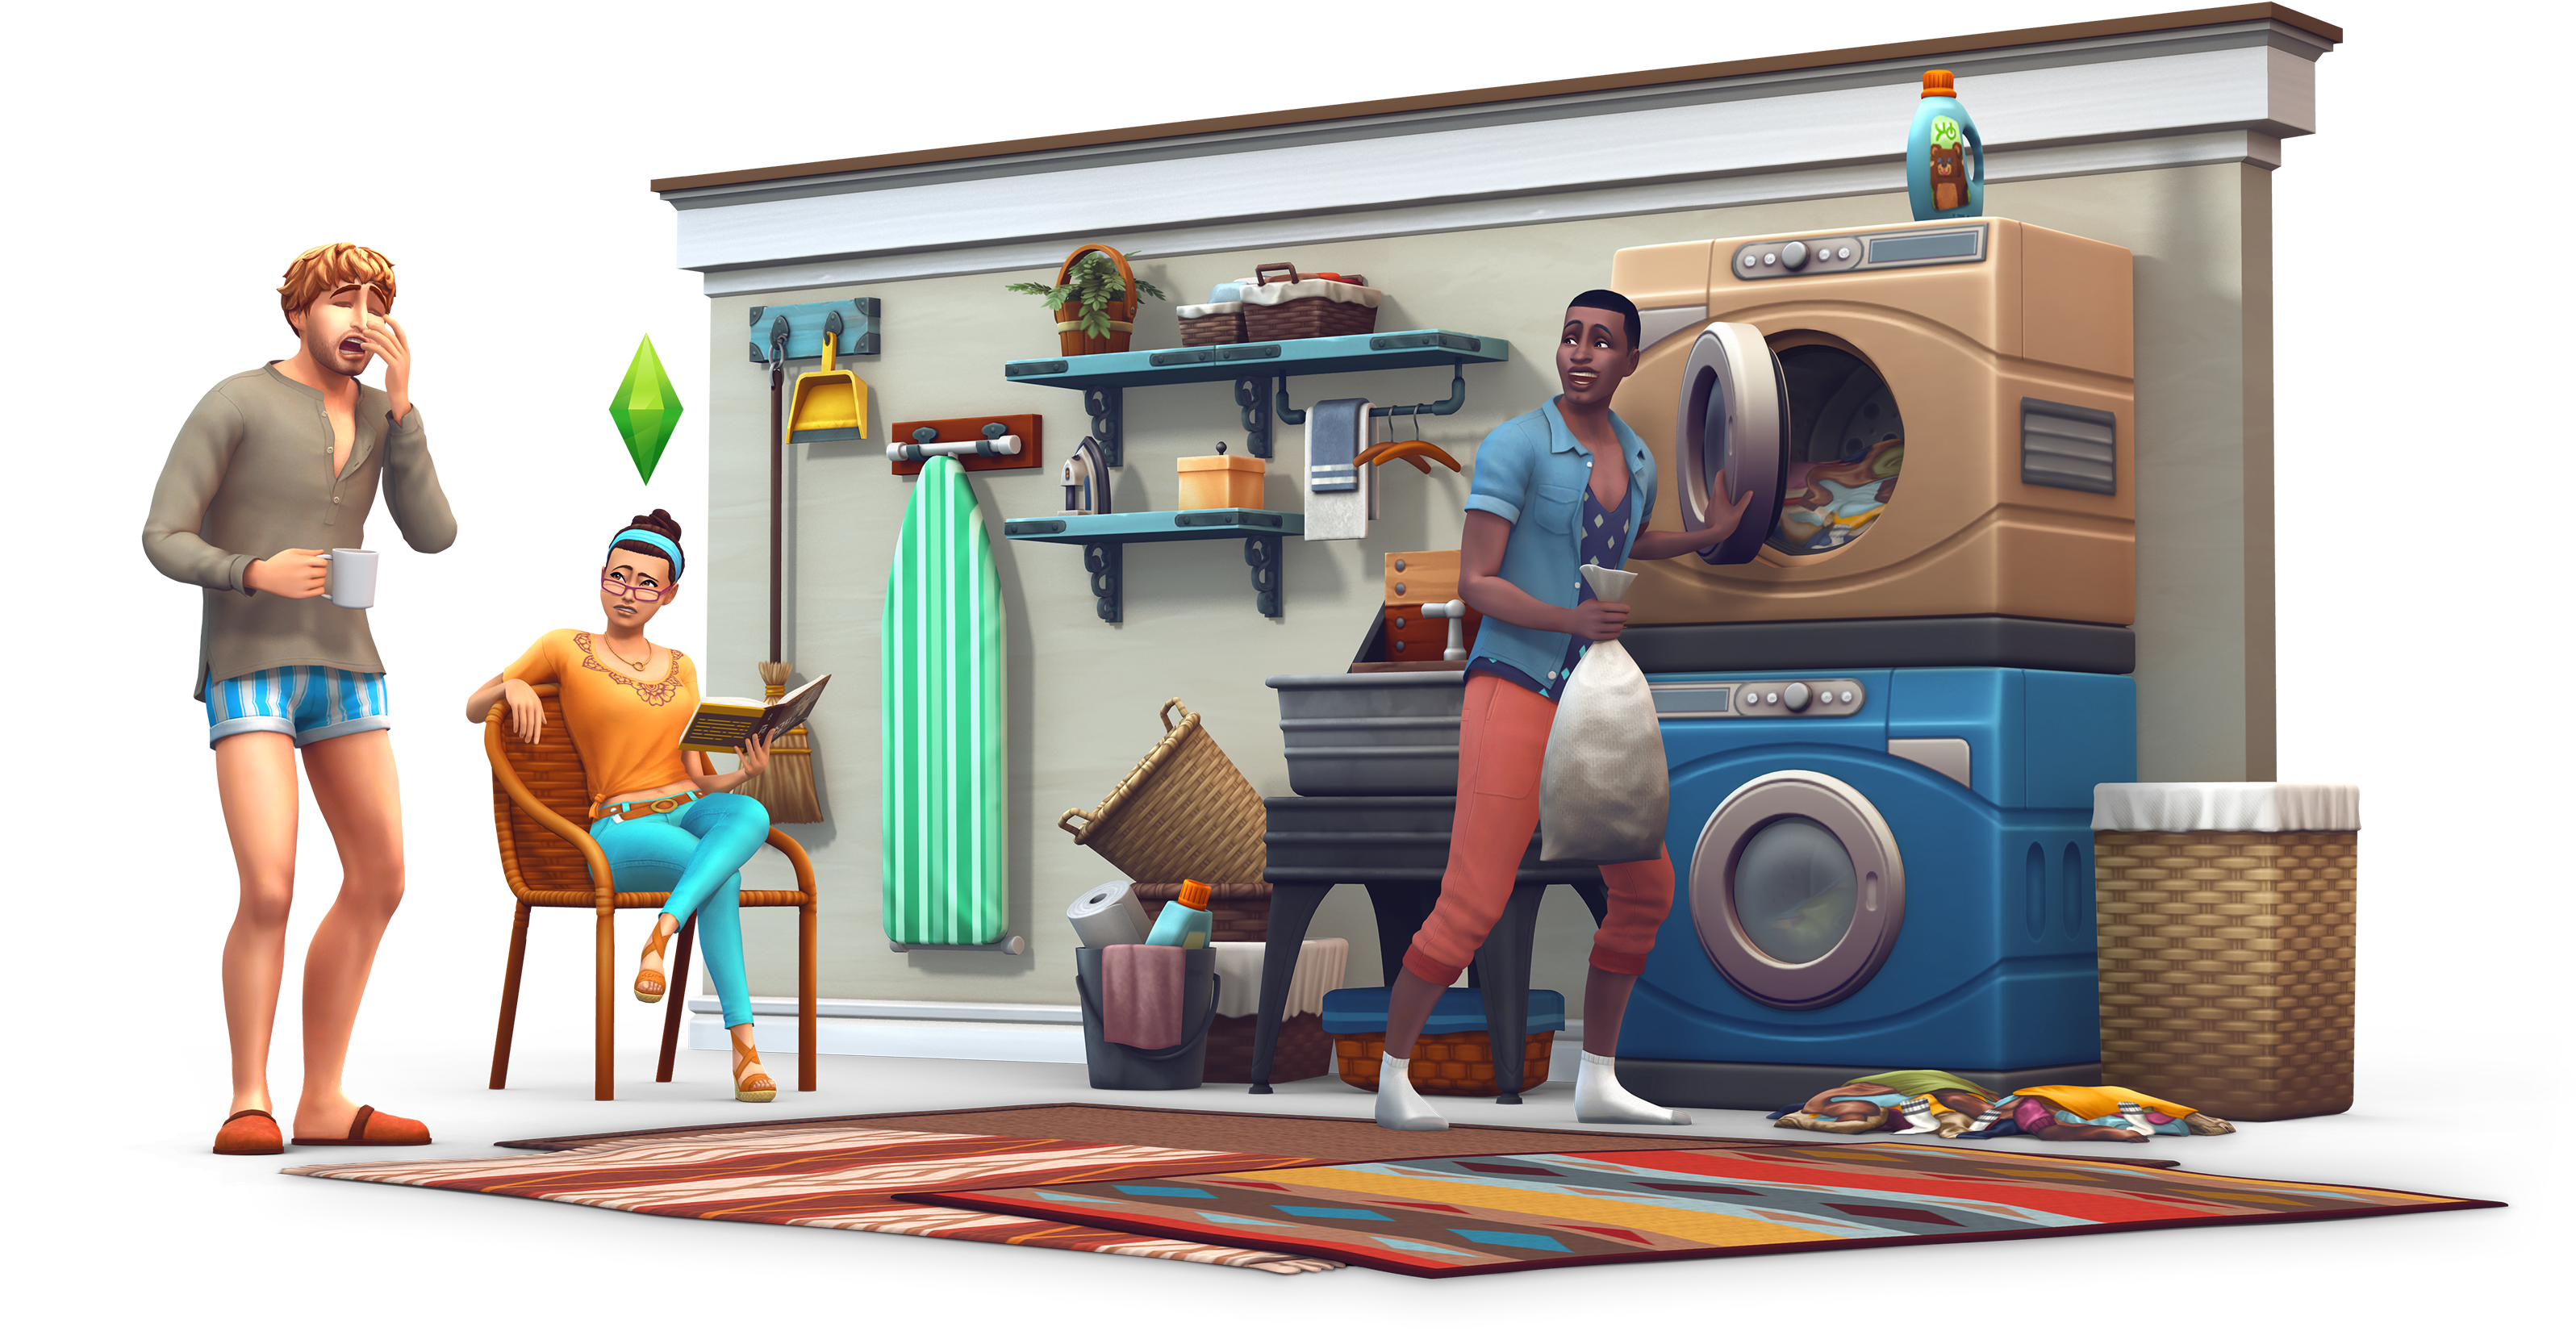 A Cartoon Of A Woman And A Man In A Laundry Room